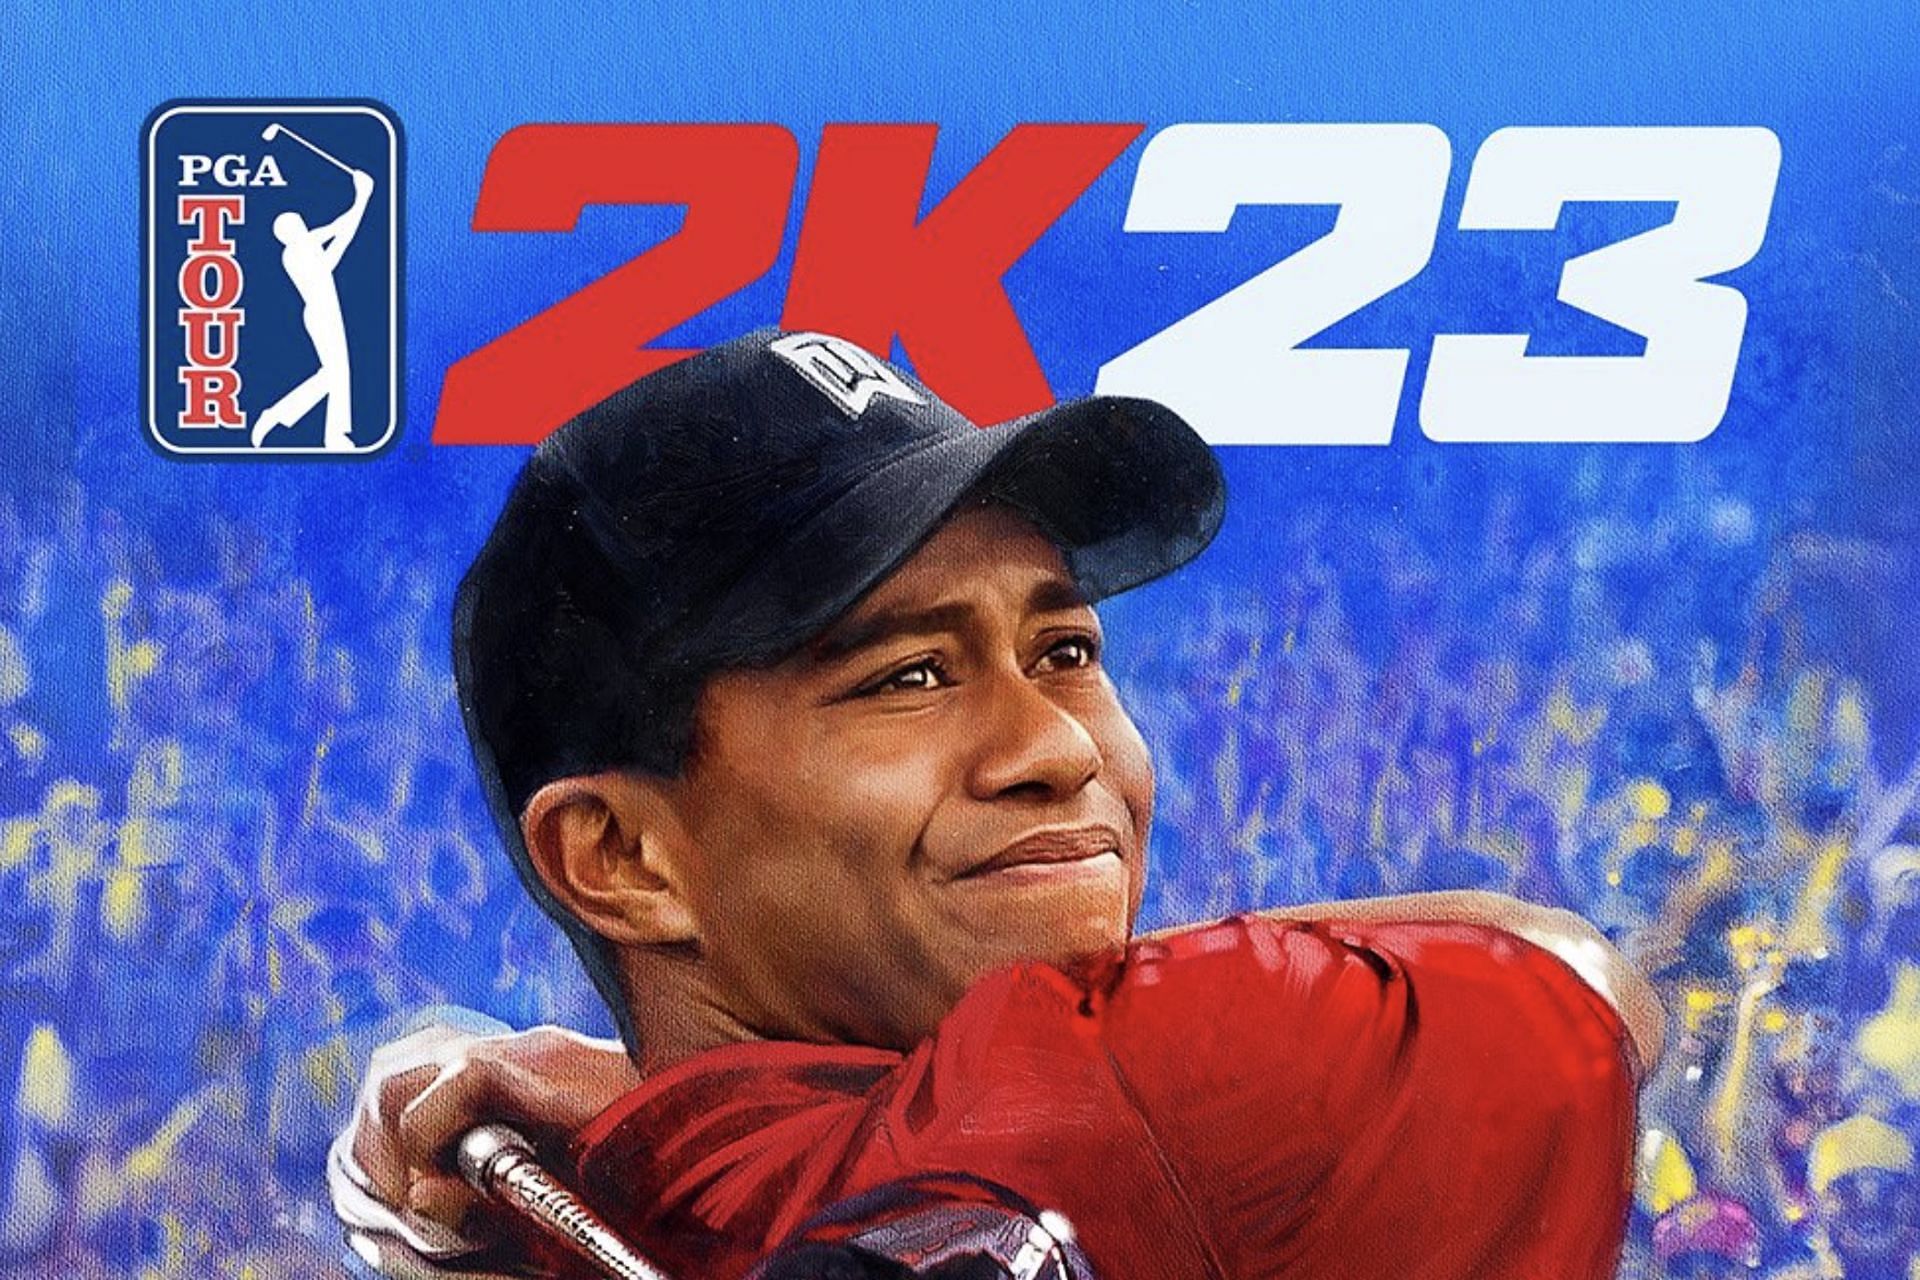 PGA Tour 2K23 will be released on October 2022 (Image via Tiger Woods/Twitter)